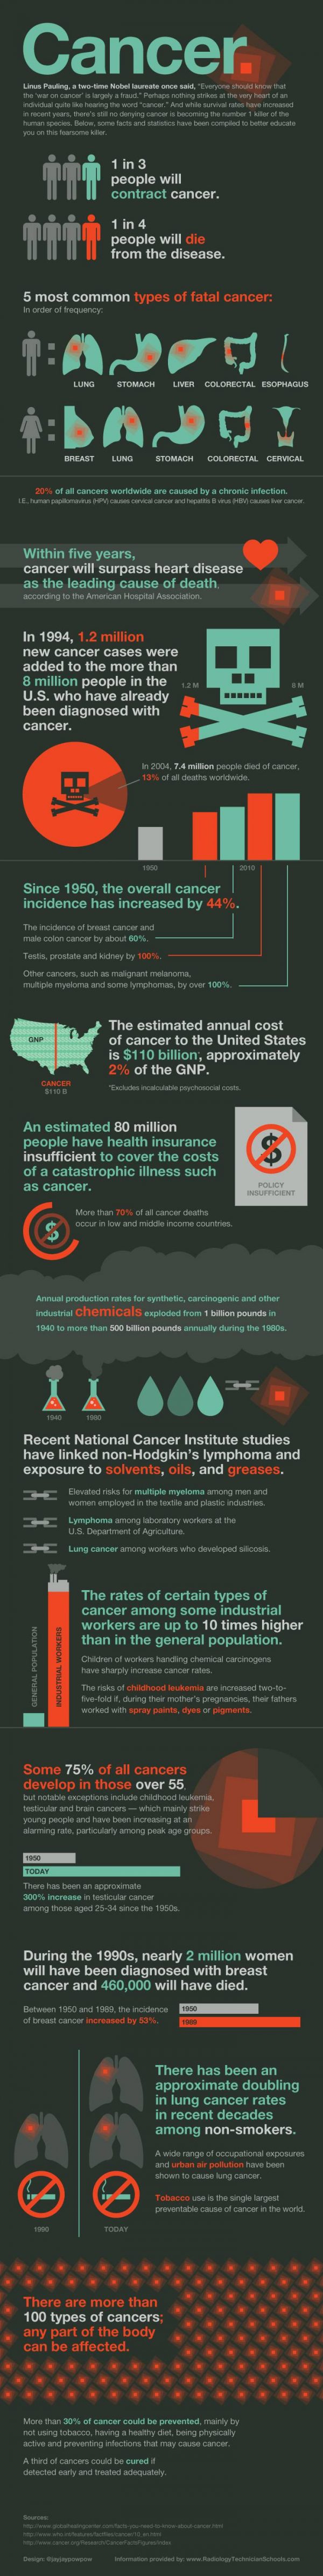 Facts About Cancer (Infographic)